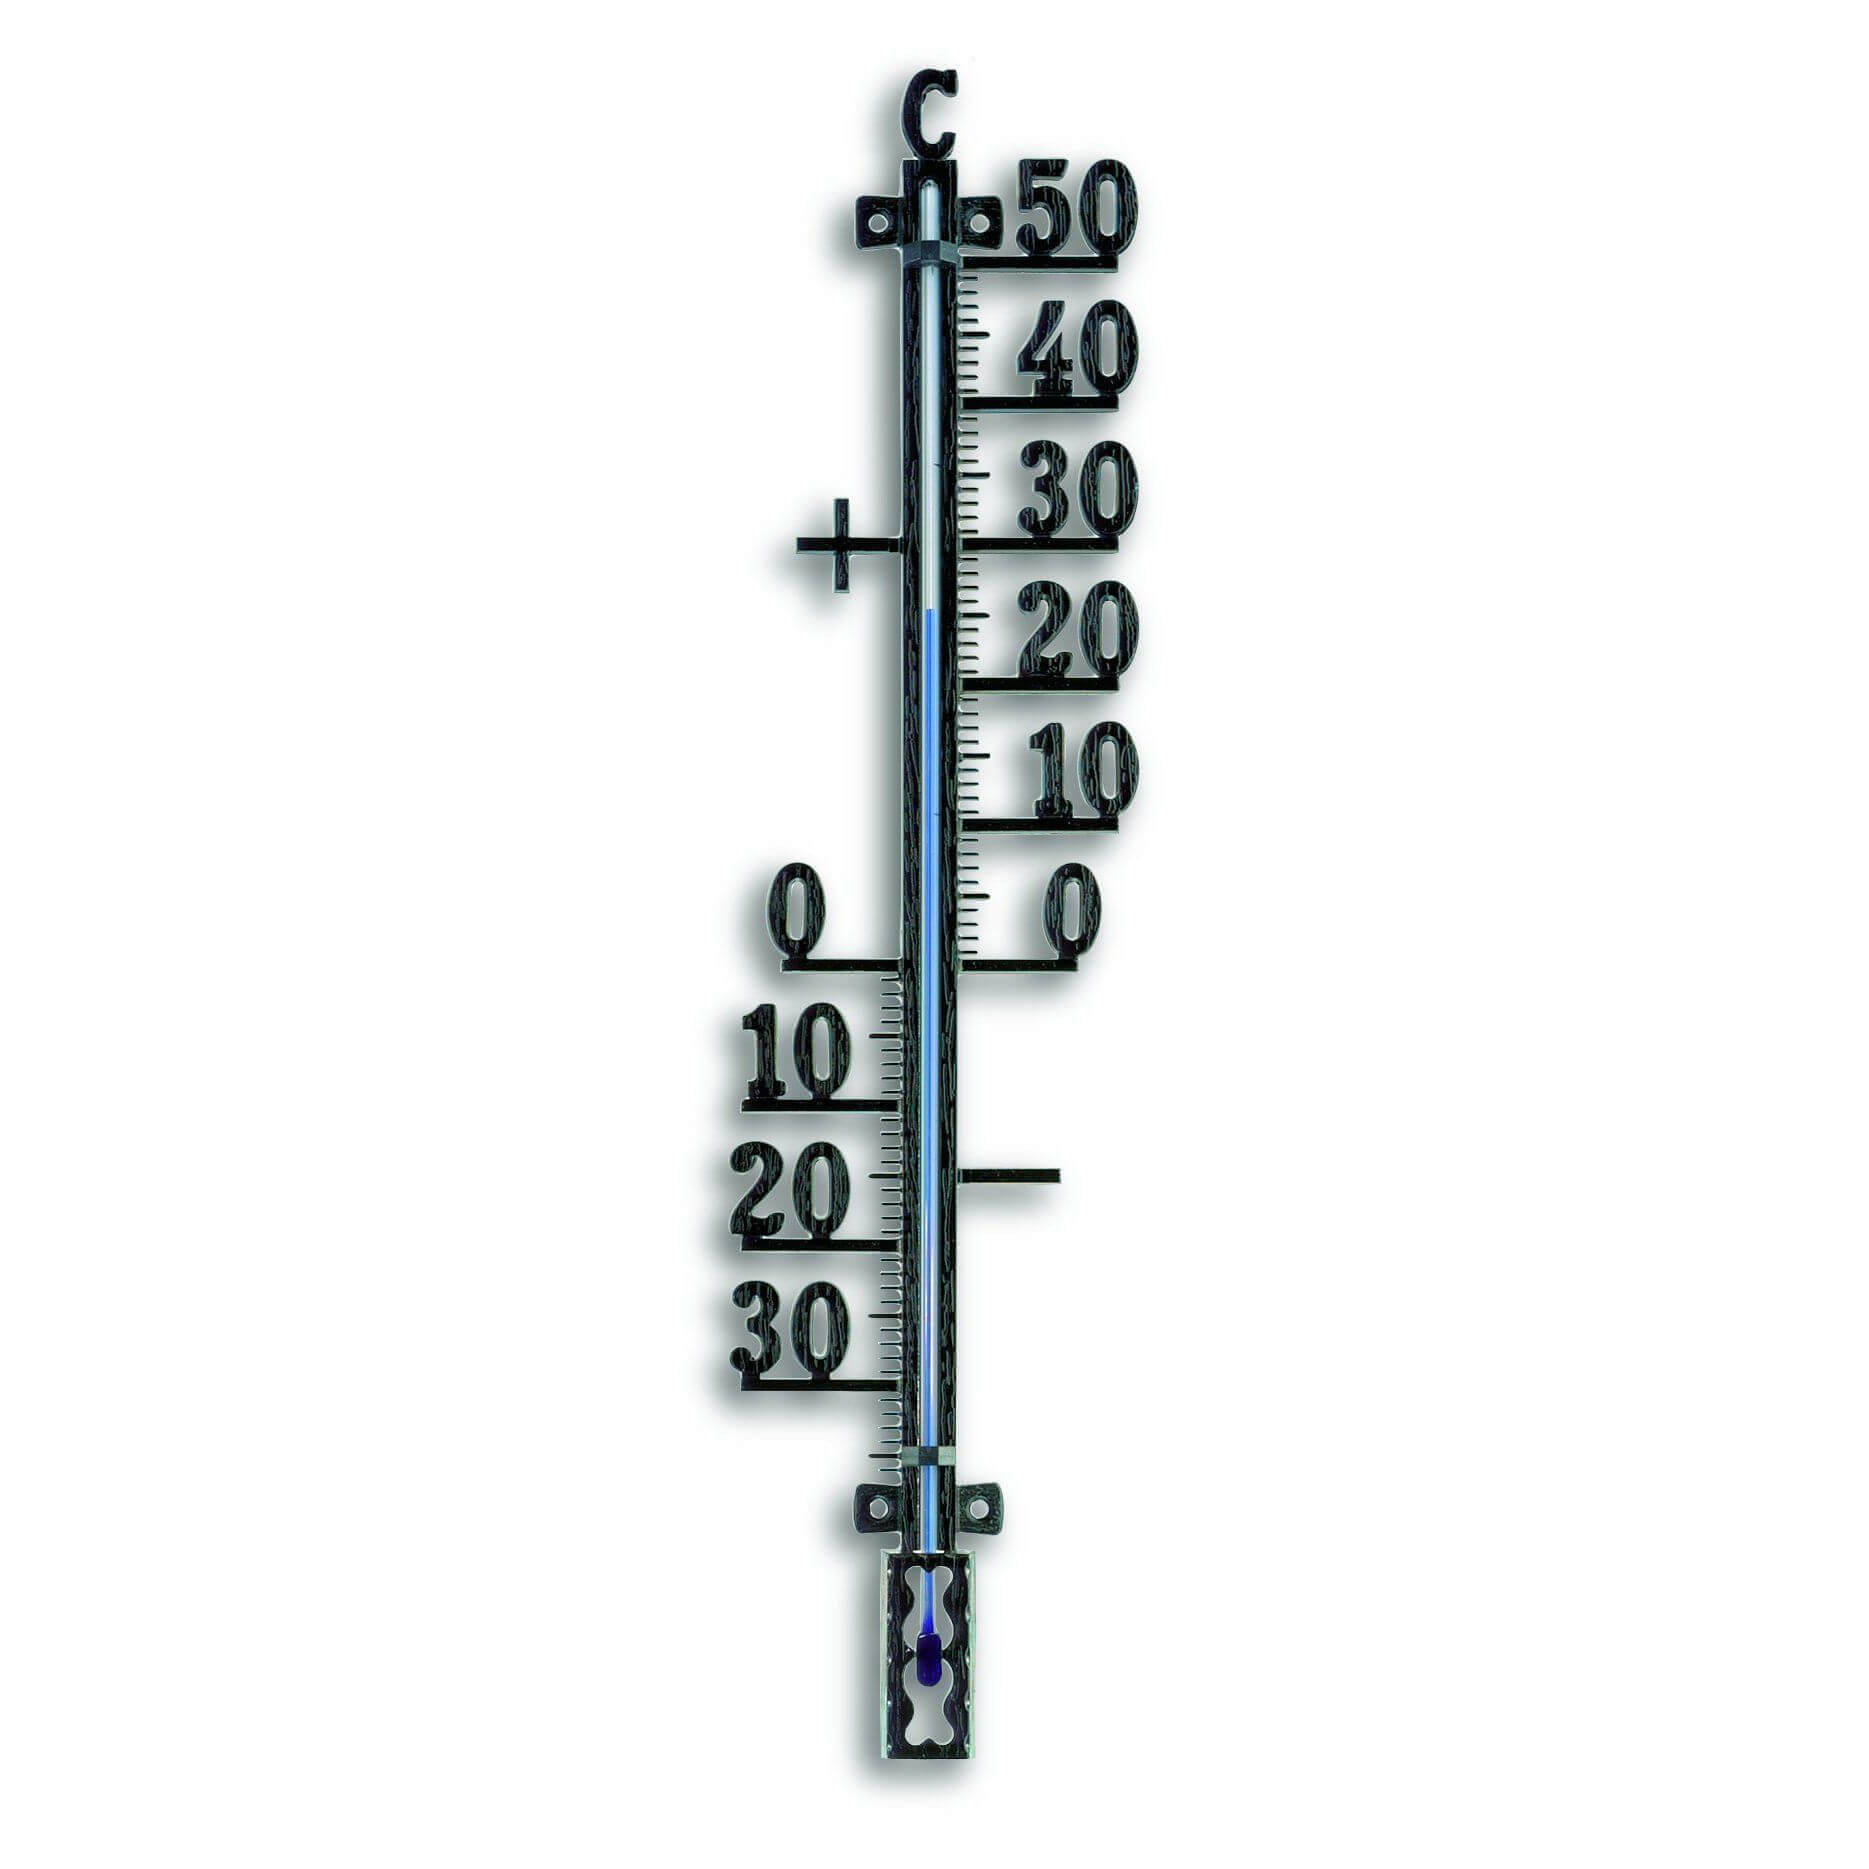 https://foter.com/photos/title/outdoor-wall-thermometers.jpg